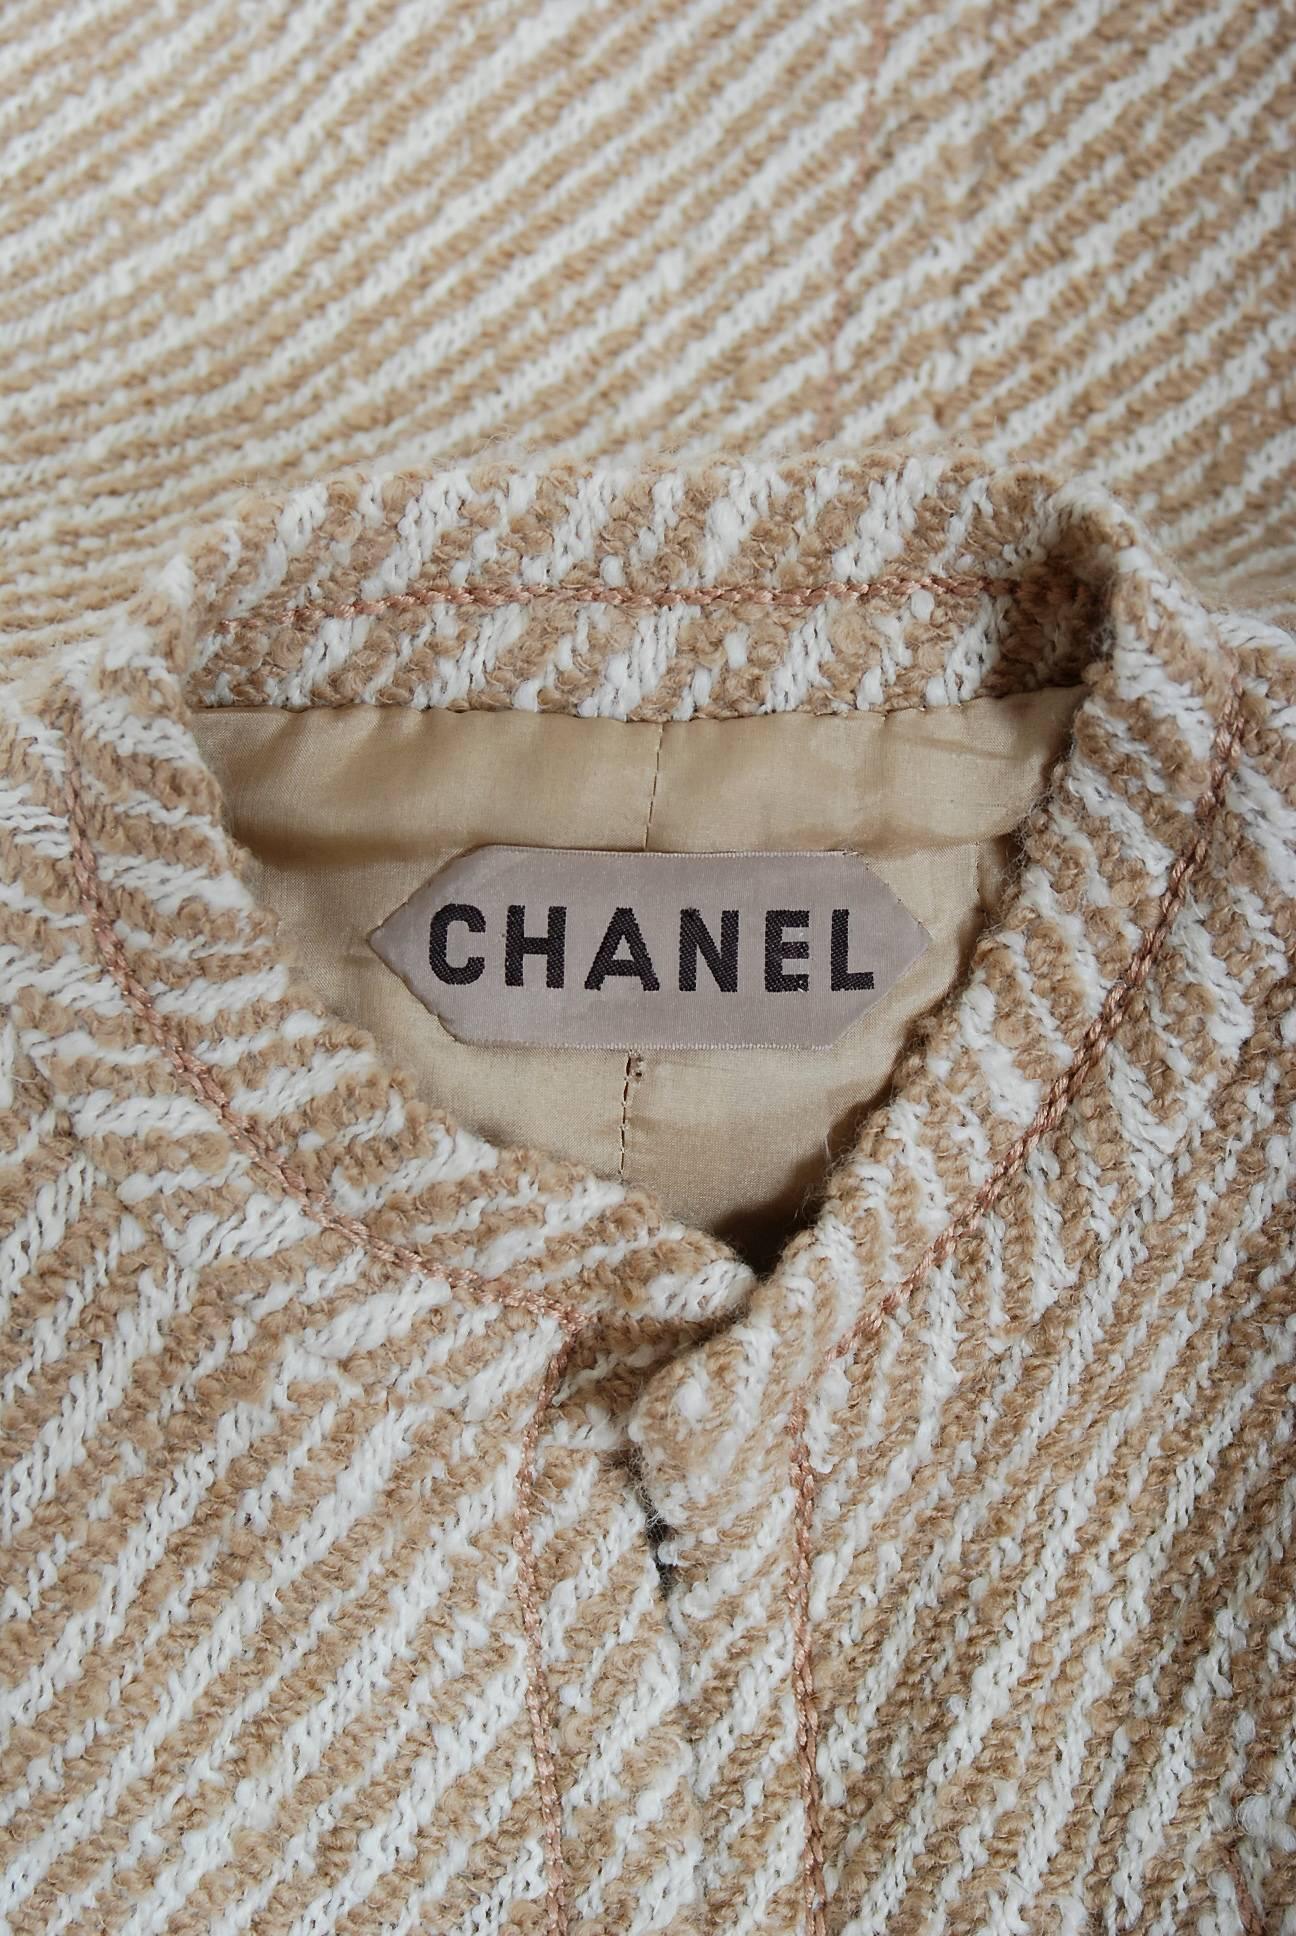 1972 Chanel Haute-Couture Ivory & Beige Striped Wool Mod Military Jacket Coat 2